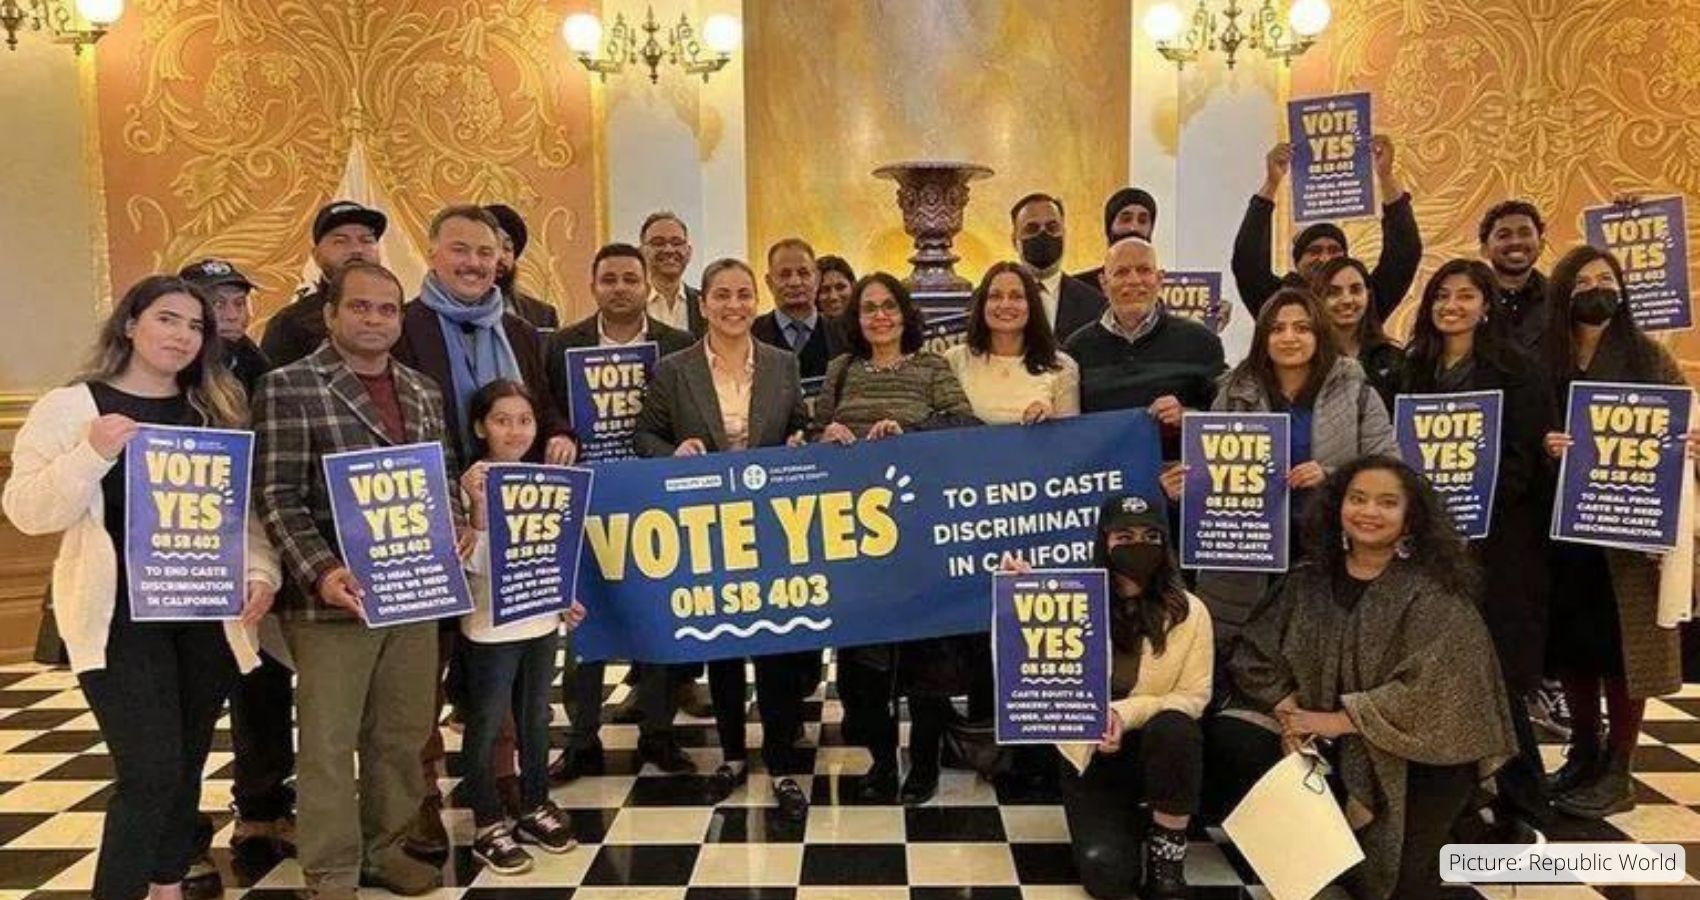 California’s Caste Bill Passes Key Hurdle With 50-3 Assembly Vote